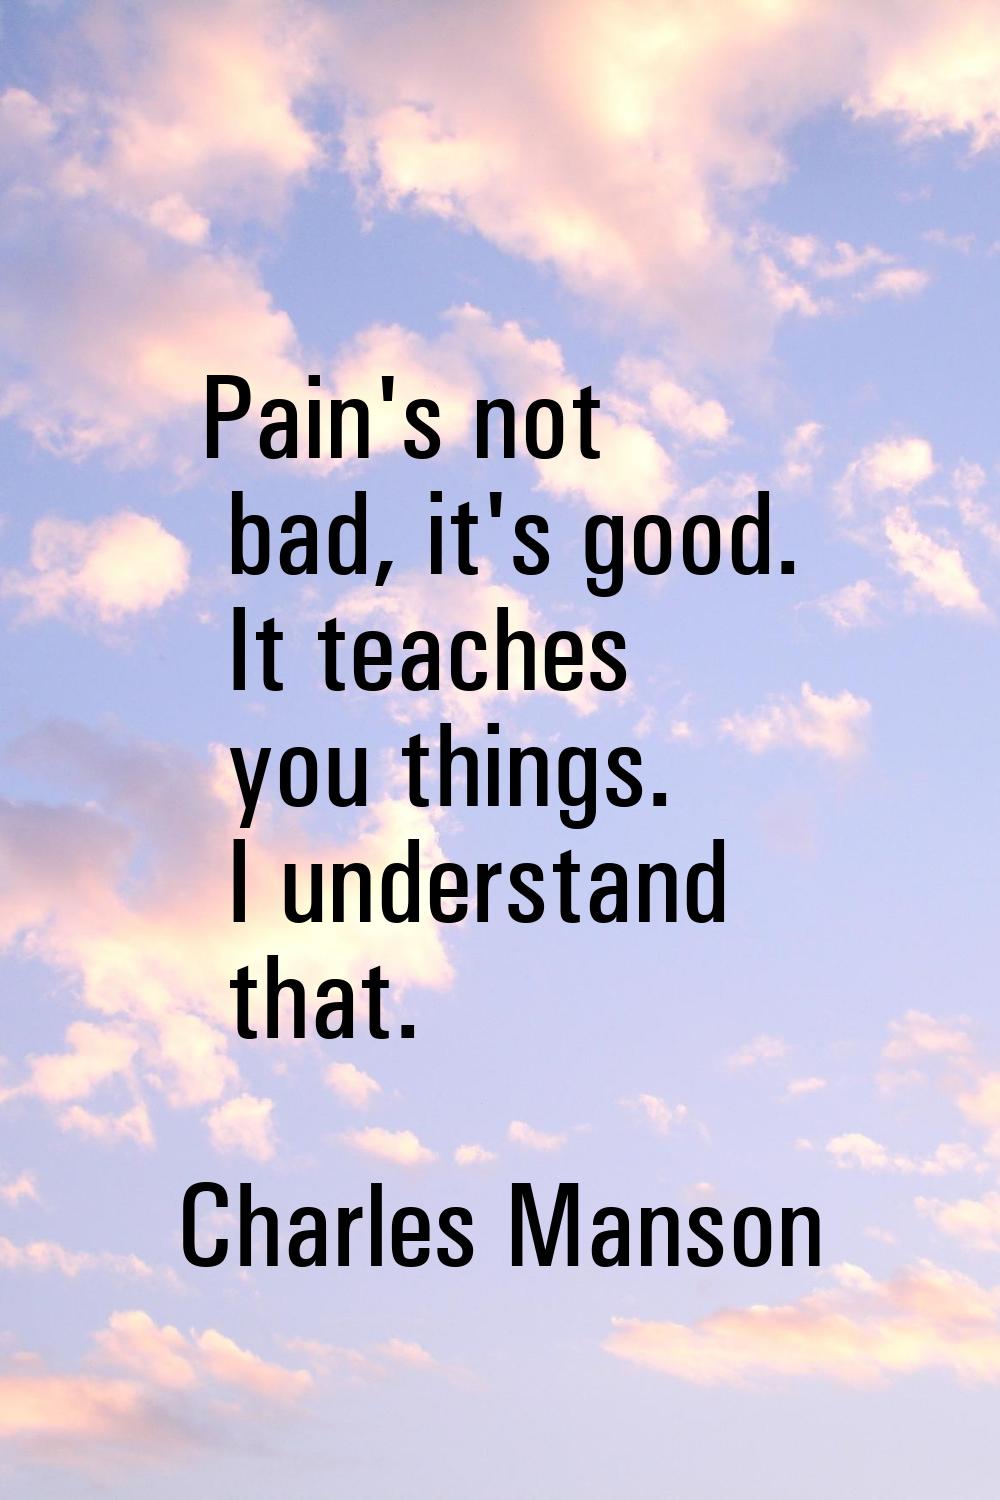 Pain's not bad, it's good. It teaches you things. I understand that.